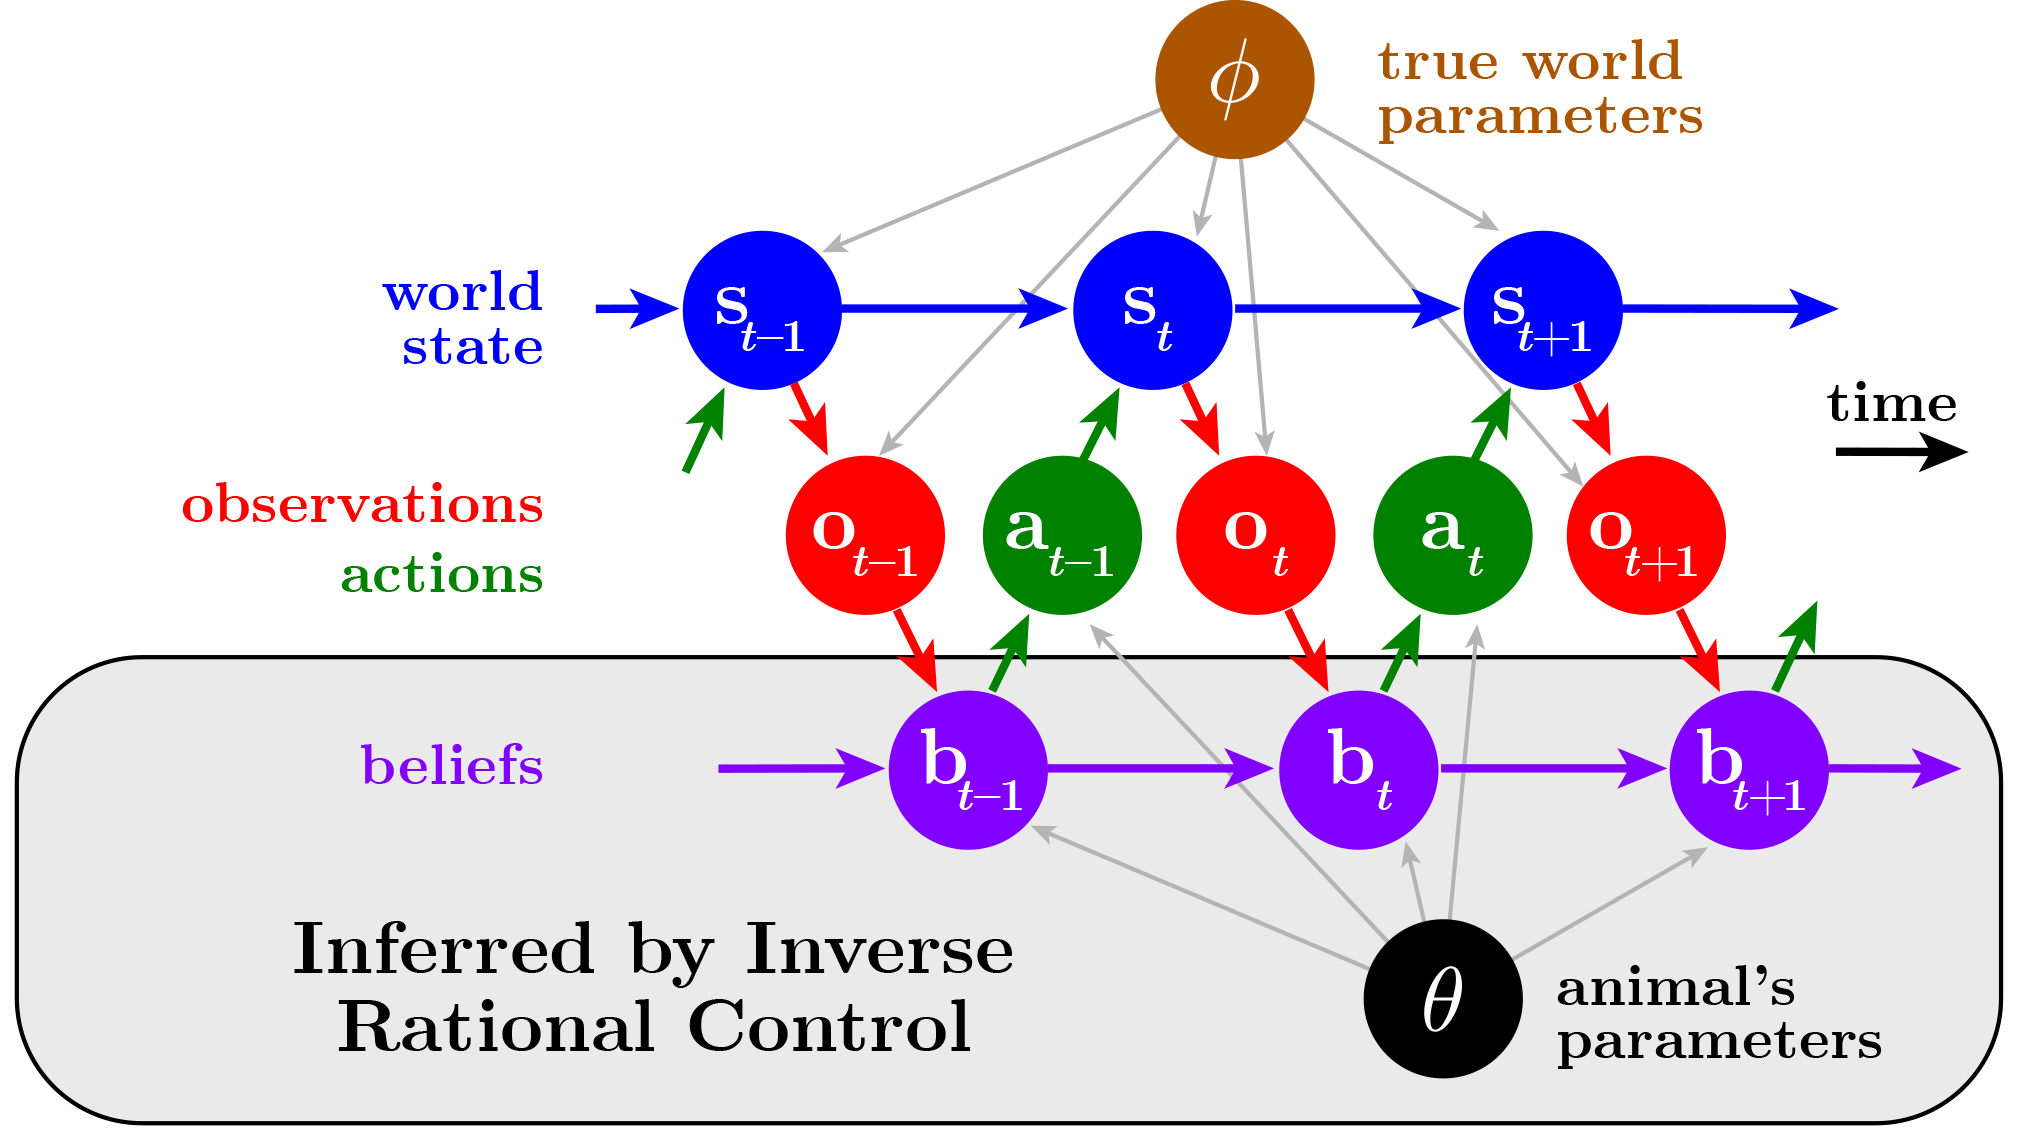 Schematic of Inverse Rational Control model